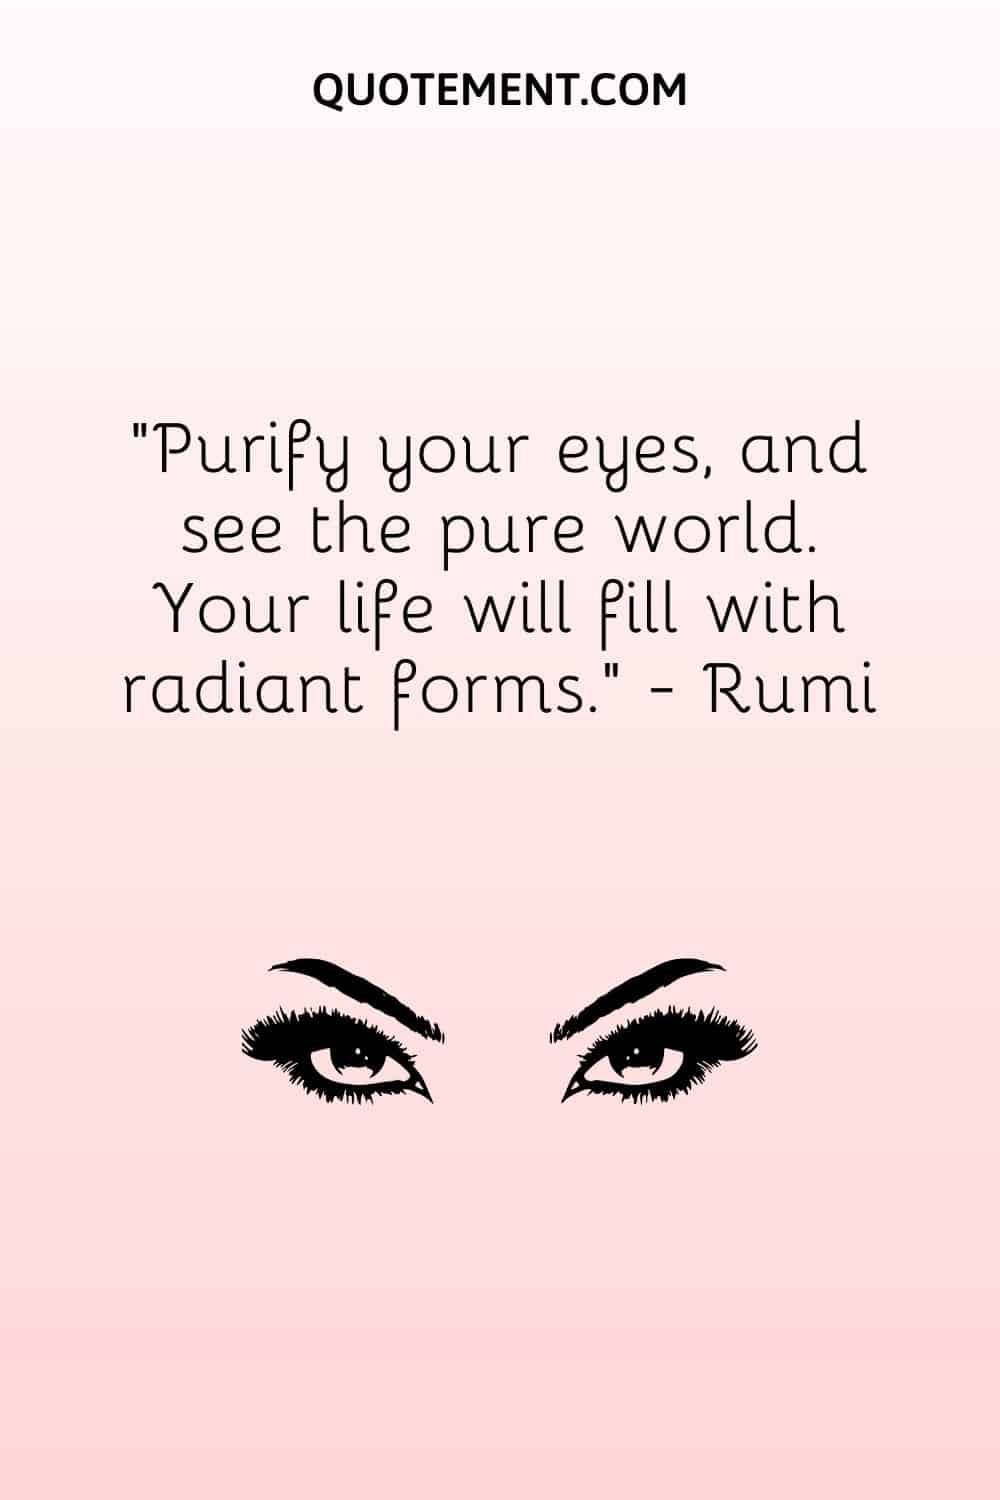 Purify your eyes, and see the pure world. Your life will fill with radiant forms